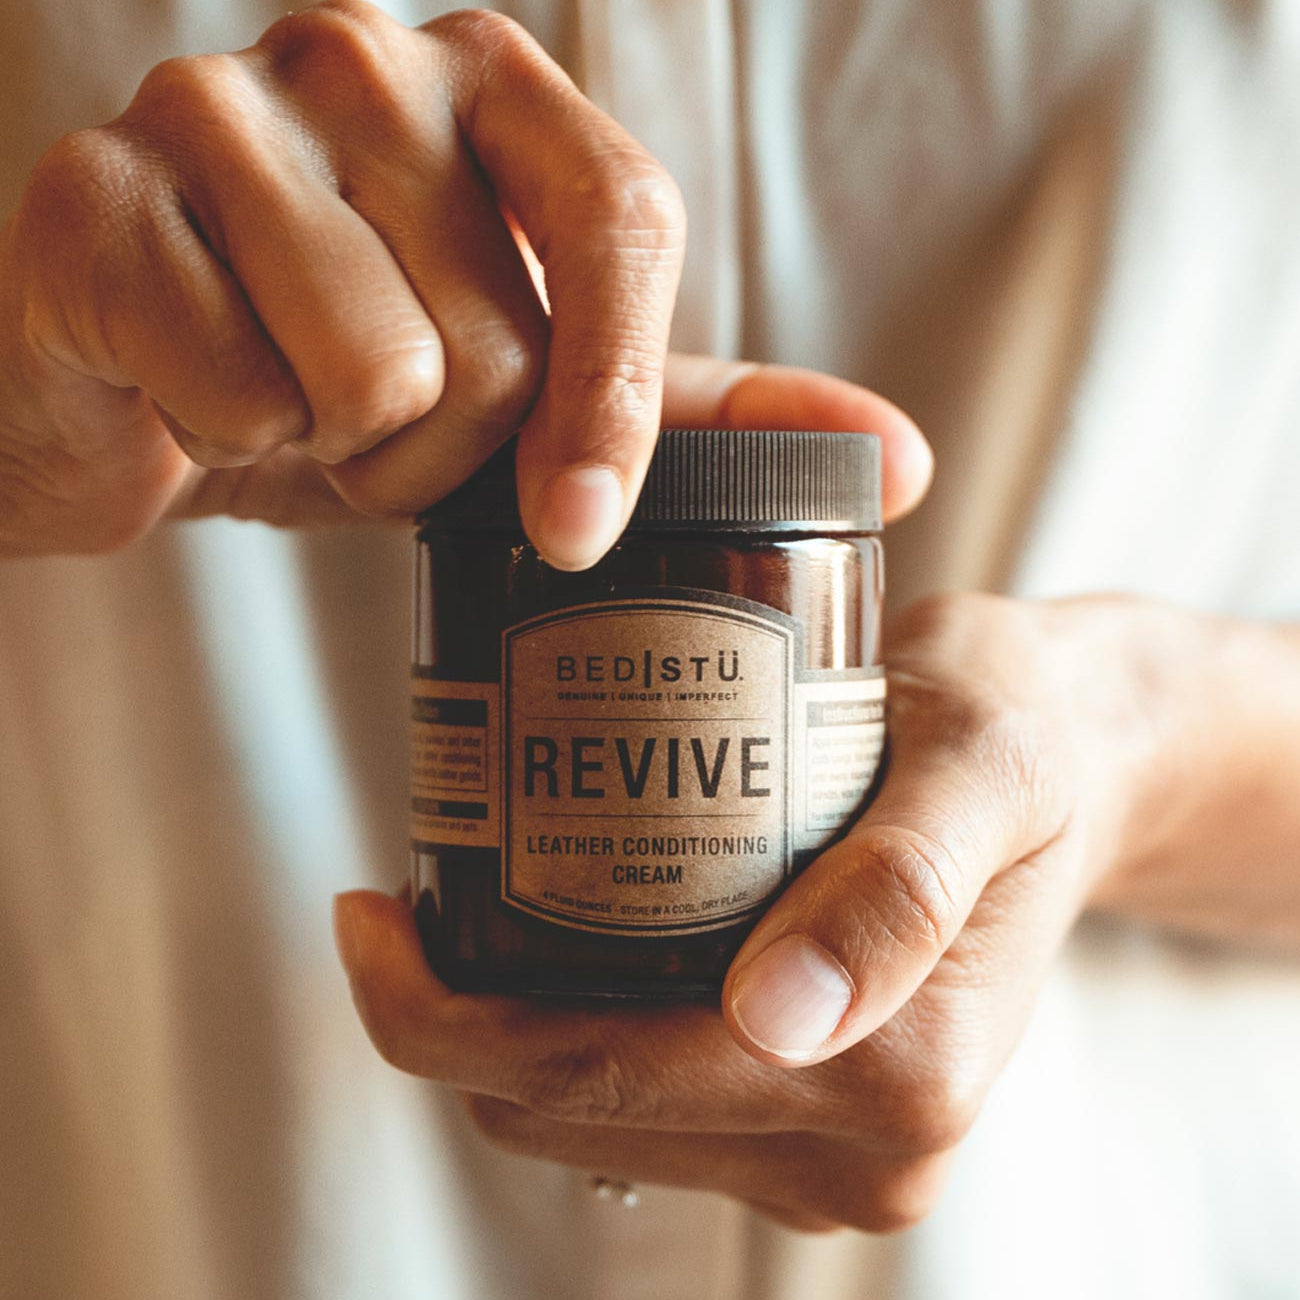 A person holding a jar of Revive Leather Cream (Bed Stu).